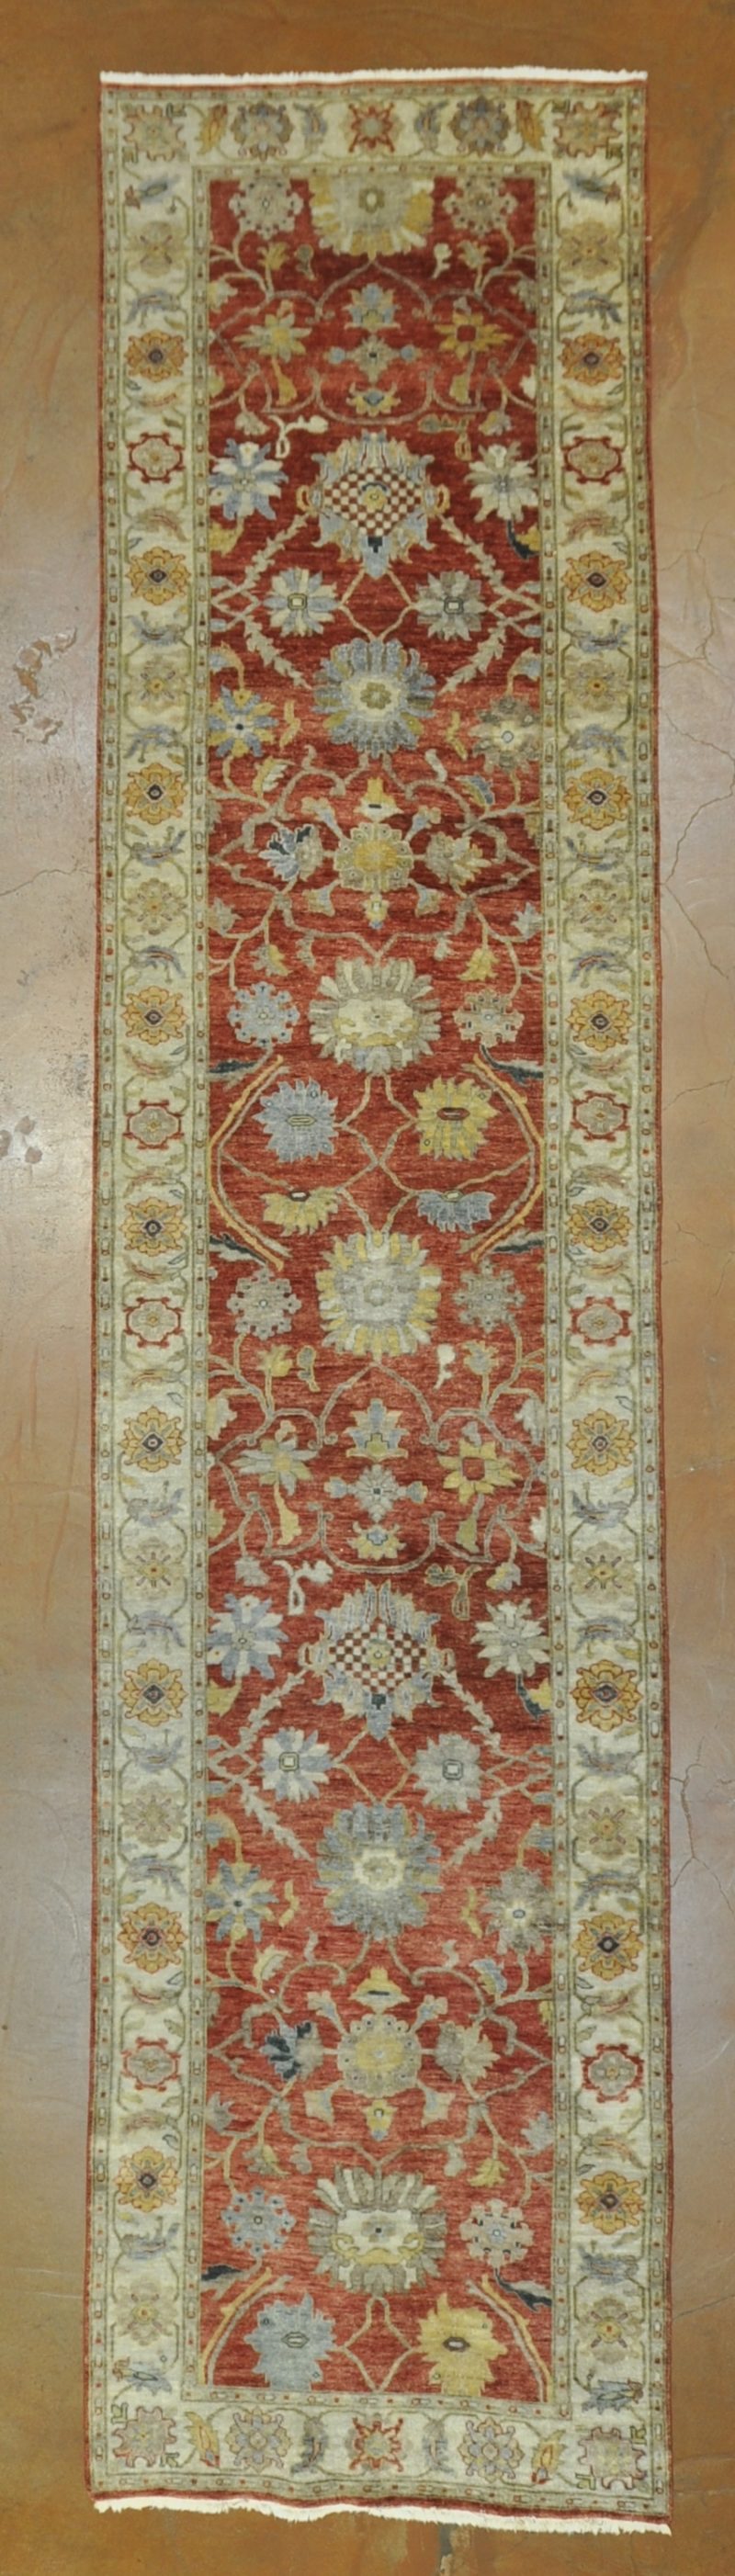 Ziegler & Co. Vintage Fine Agra Rugs and more1